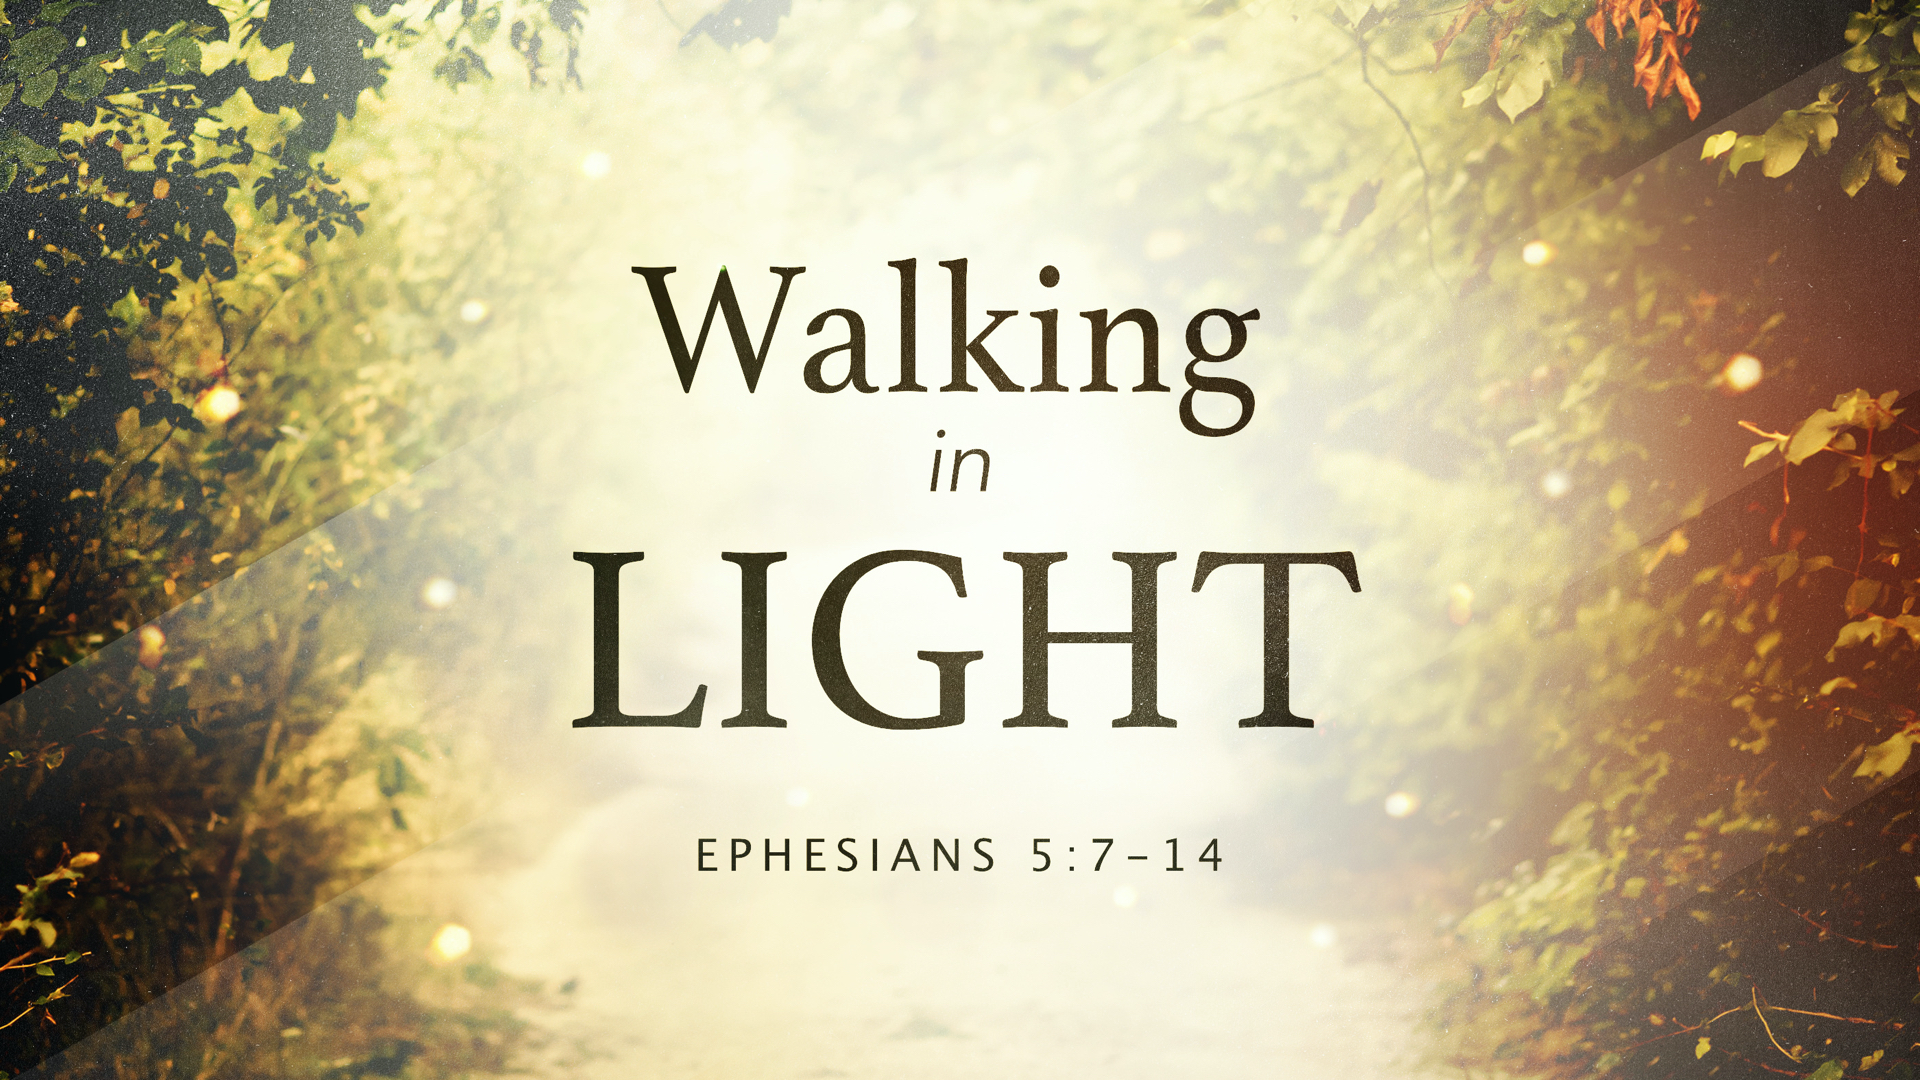 1 - 21.7.4p - Walking In Light - Title.png